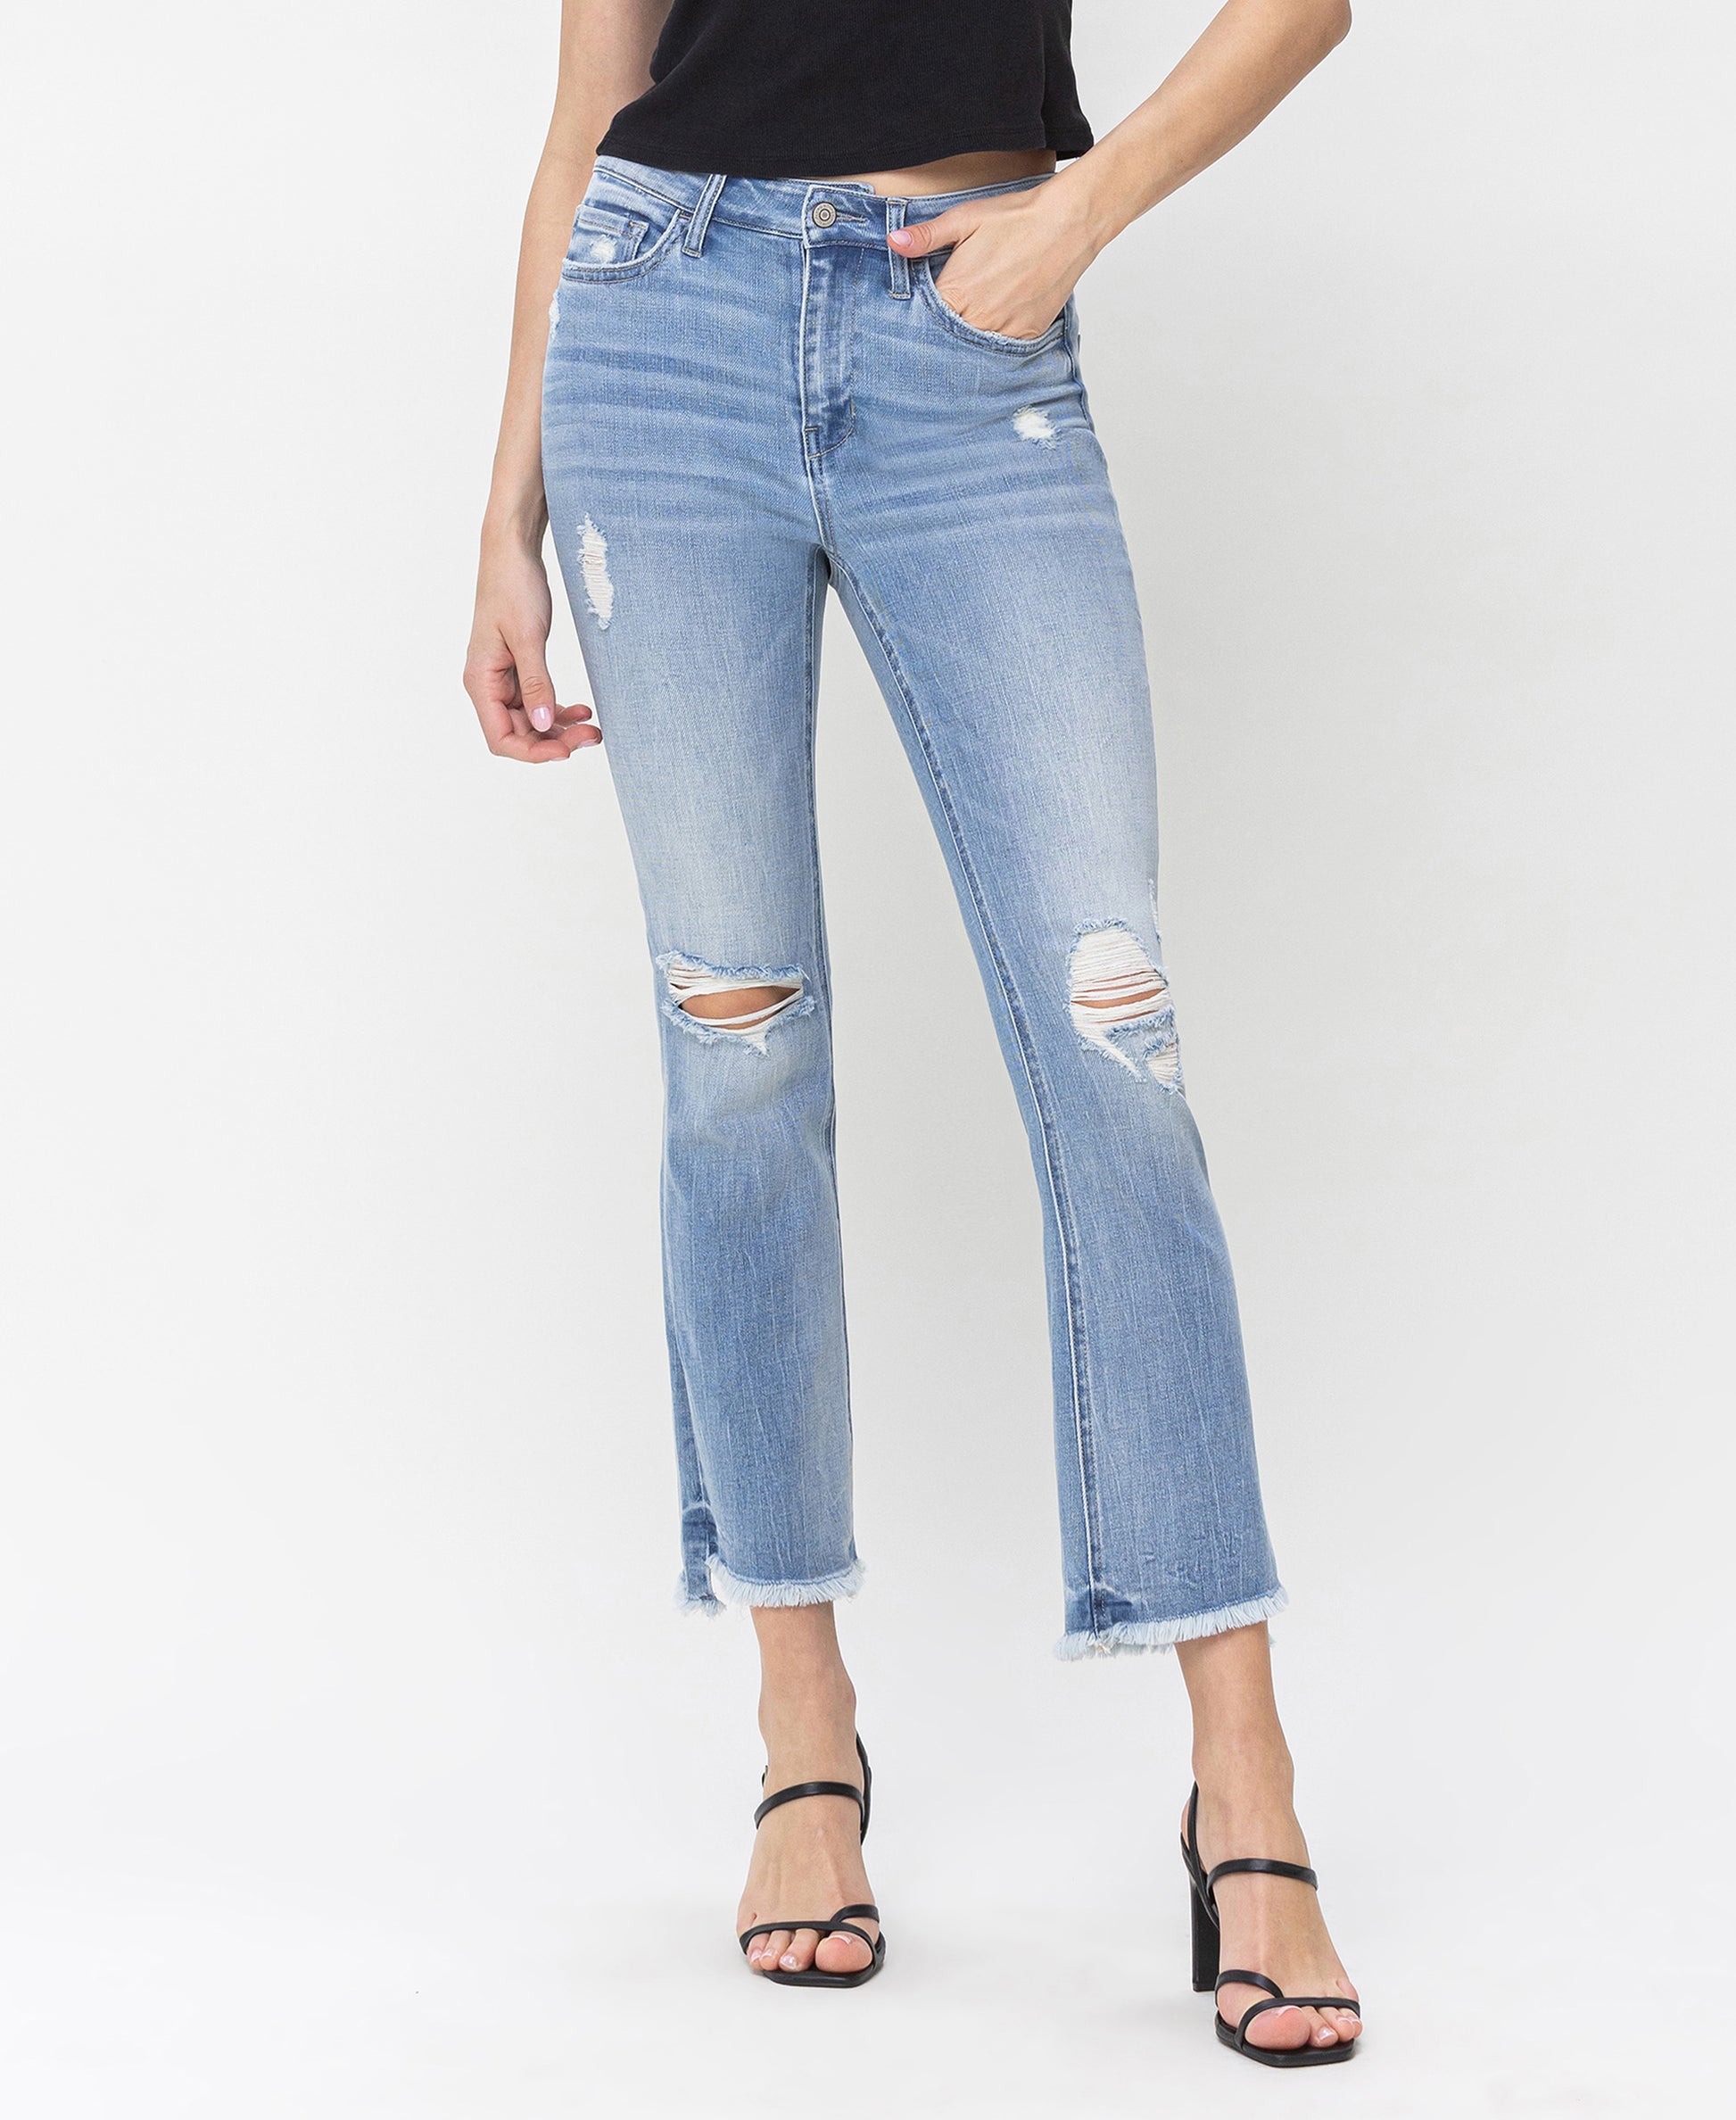 Front product images of Frolic - High Rise Kick Flare Jeans